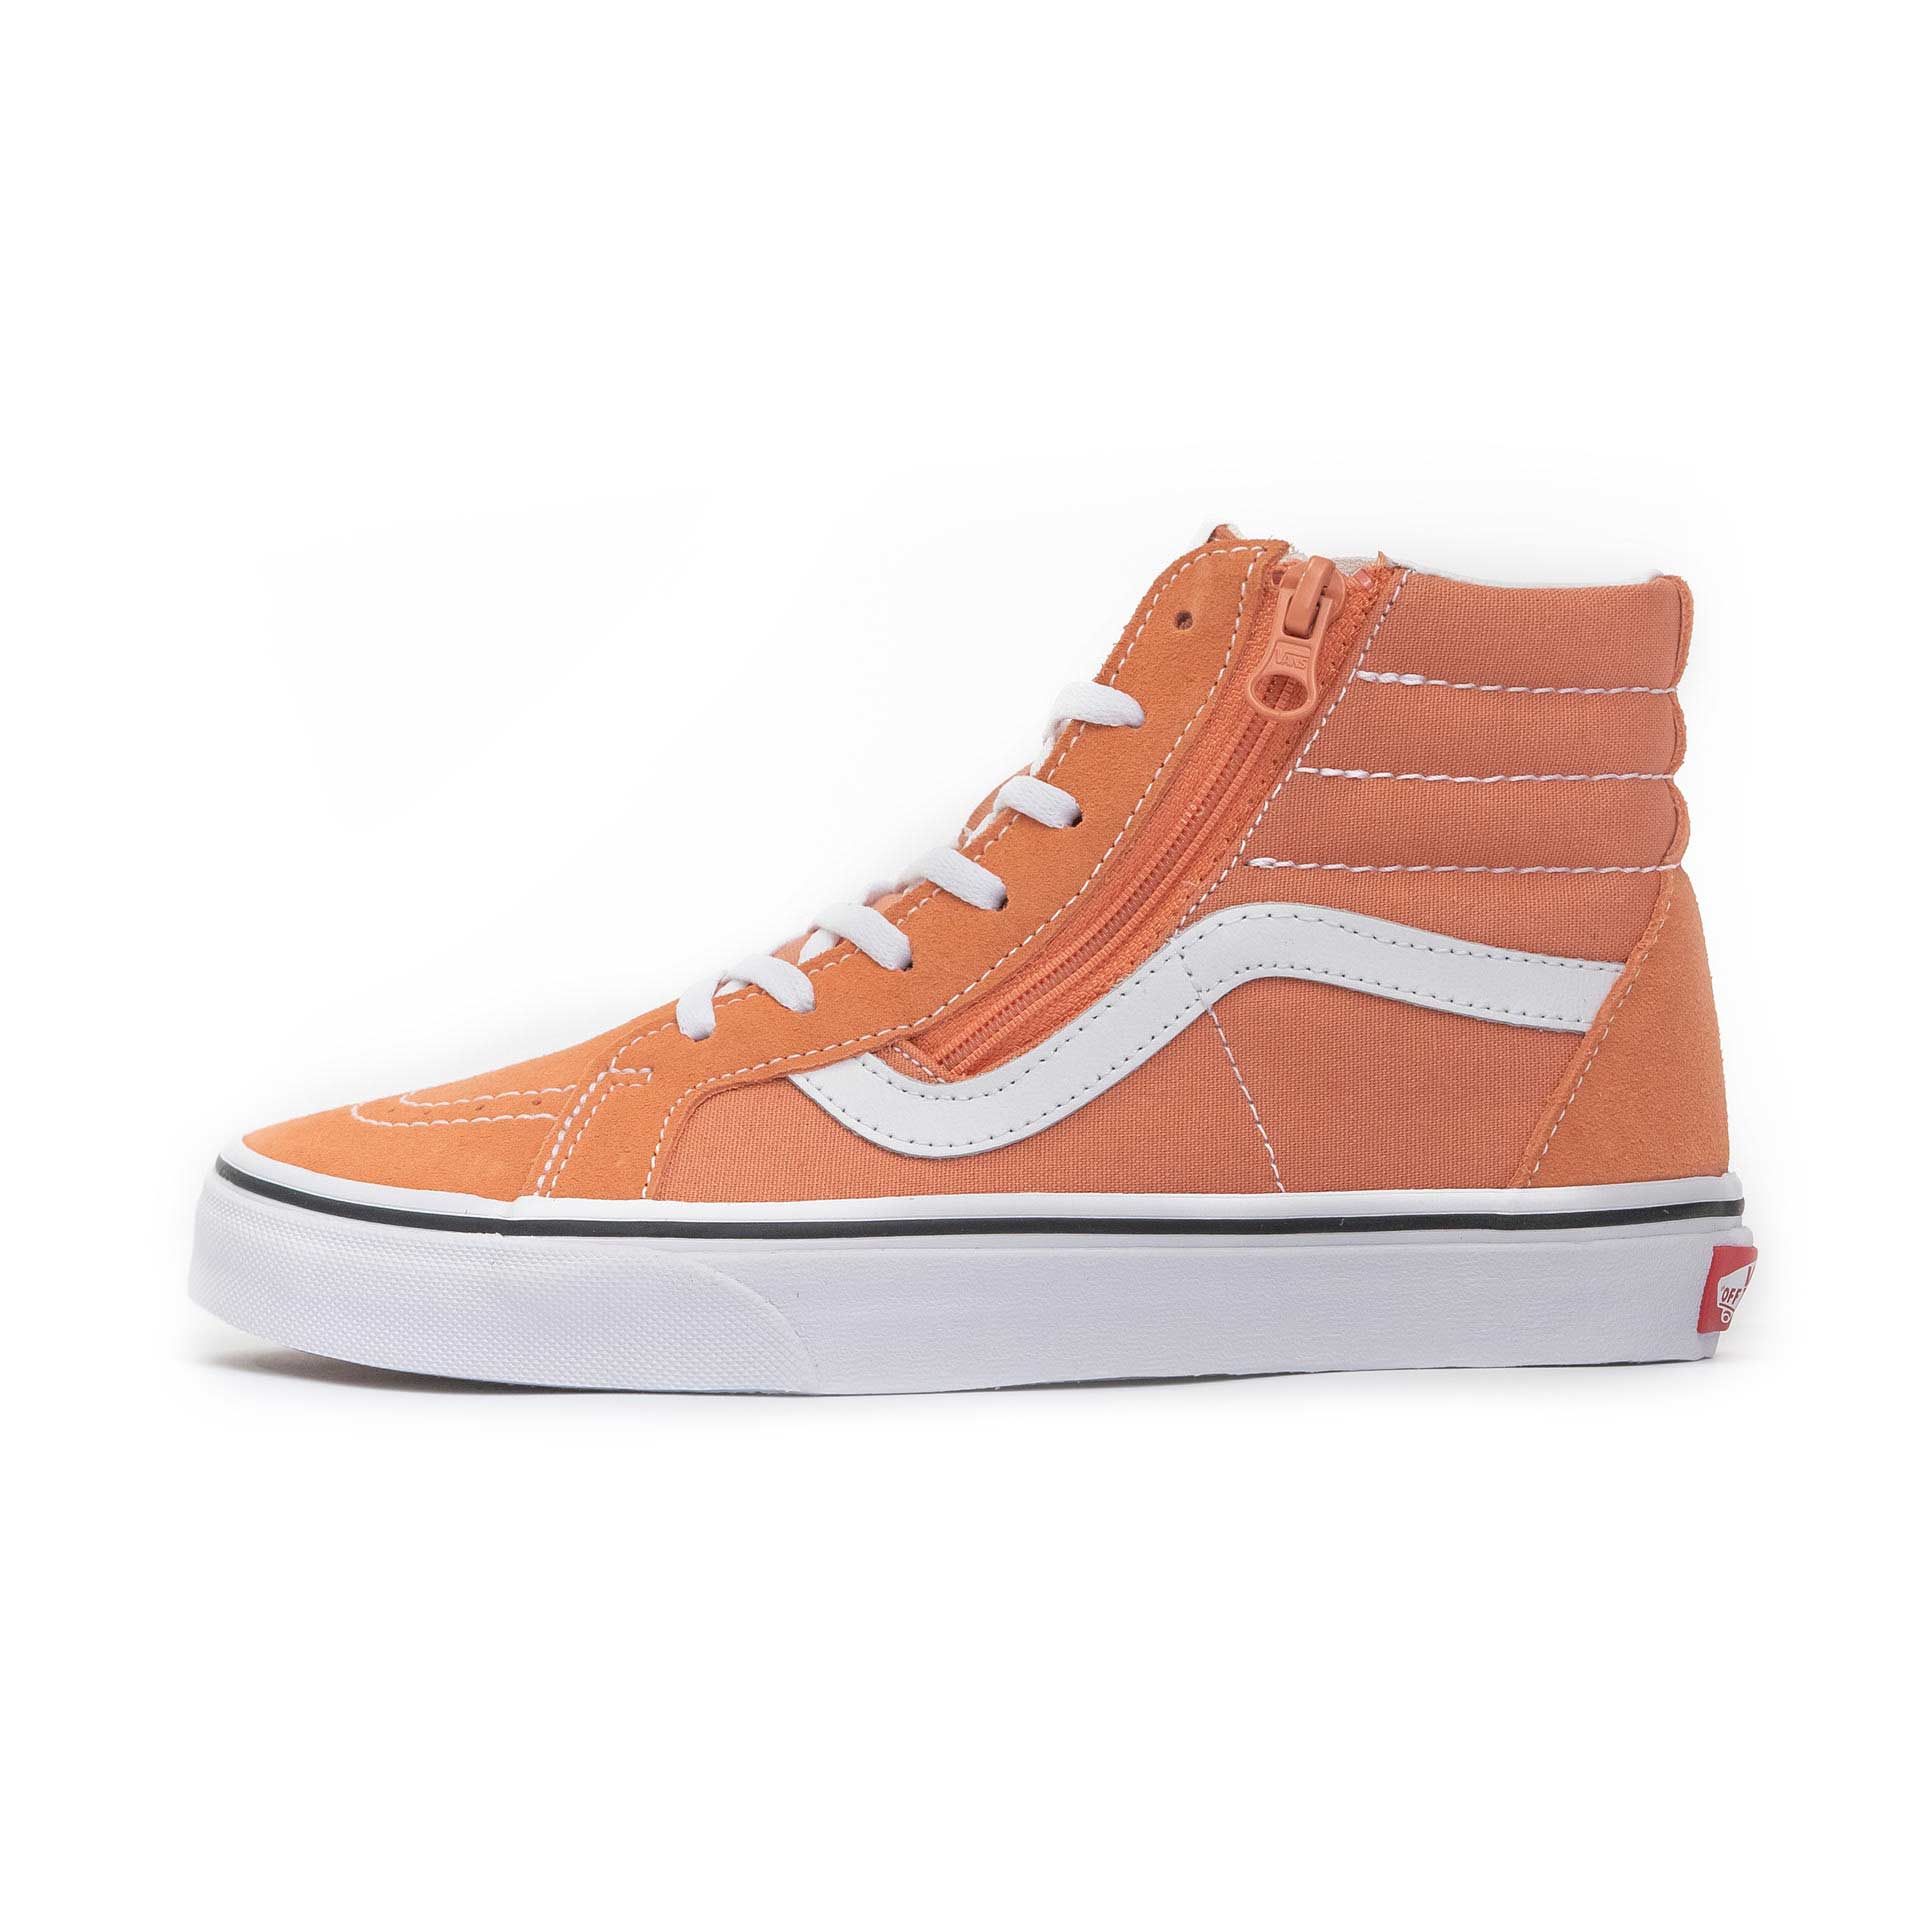 Vans Sk8-Hi Reissue Si Color Theory Sun Baked